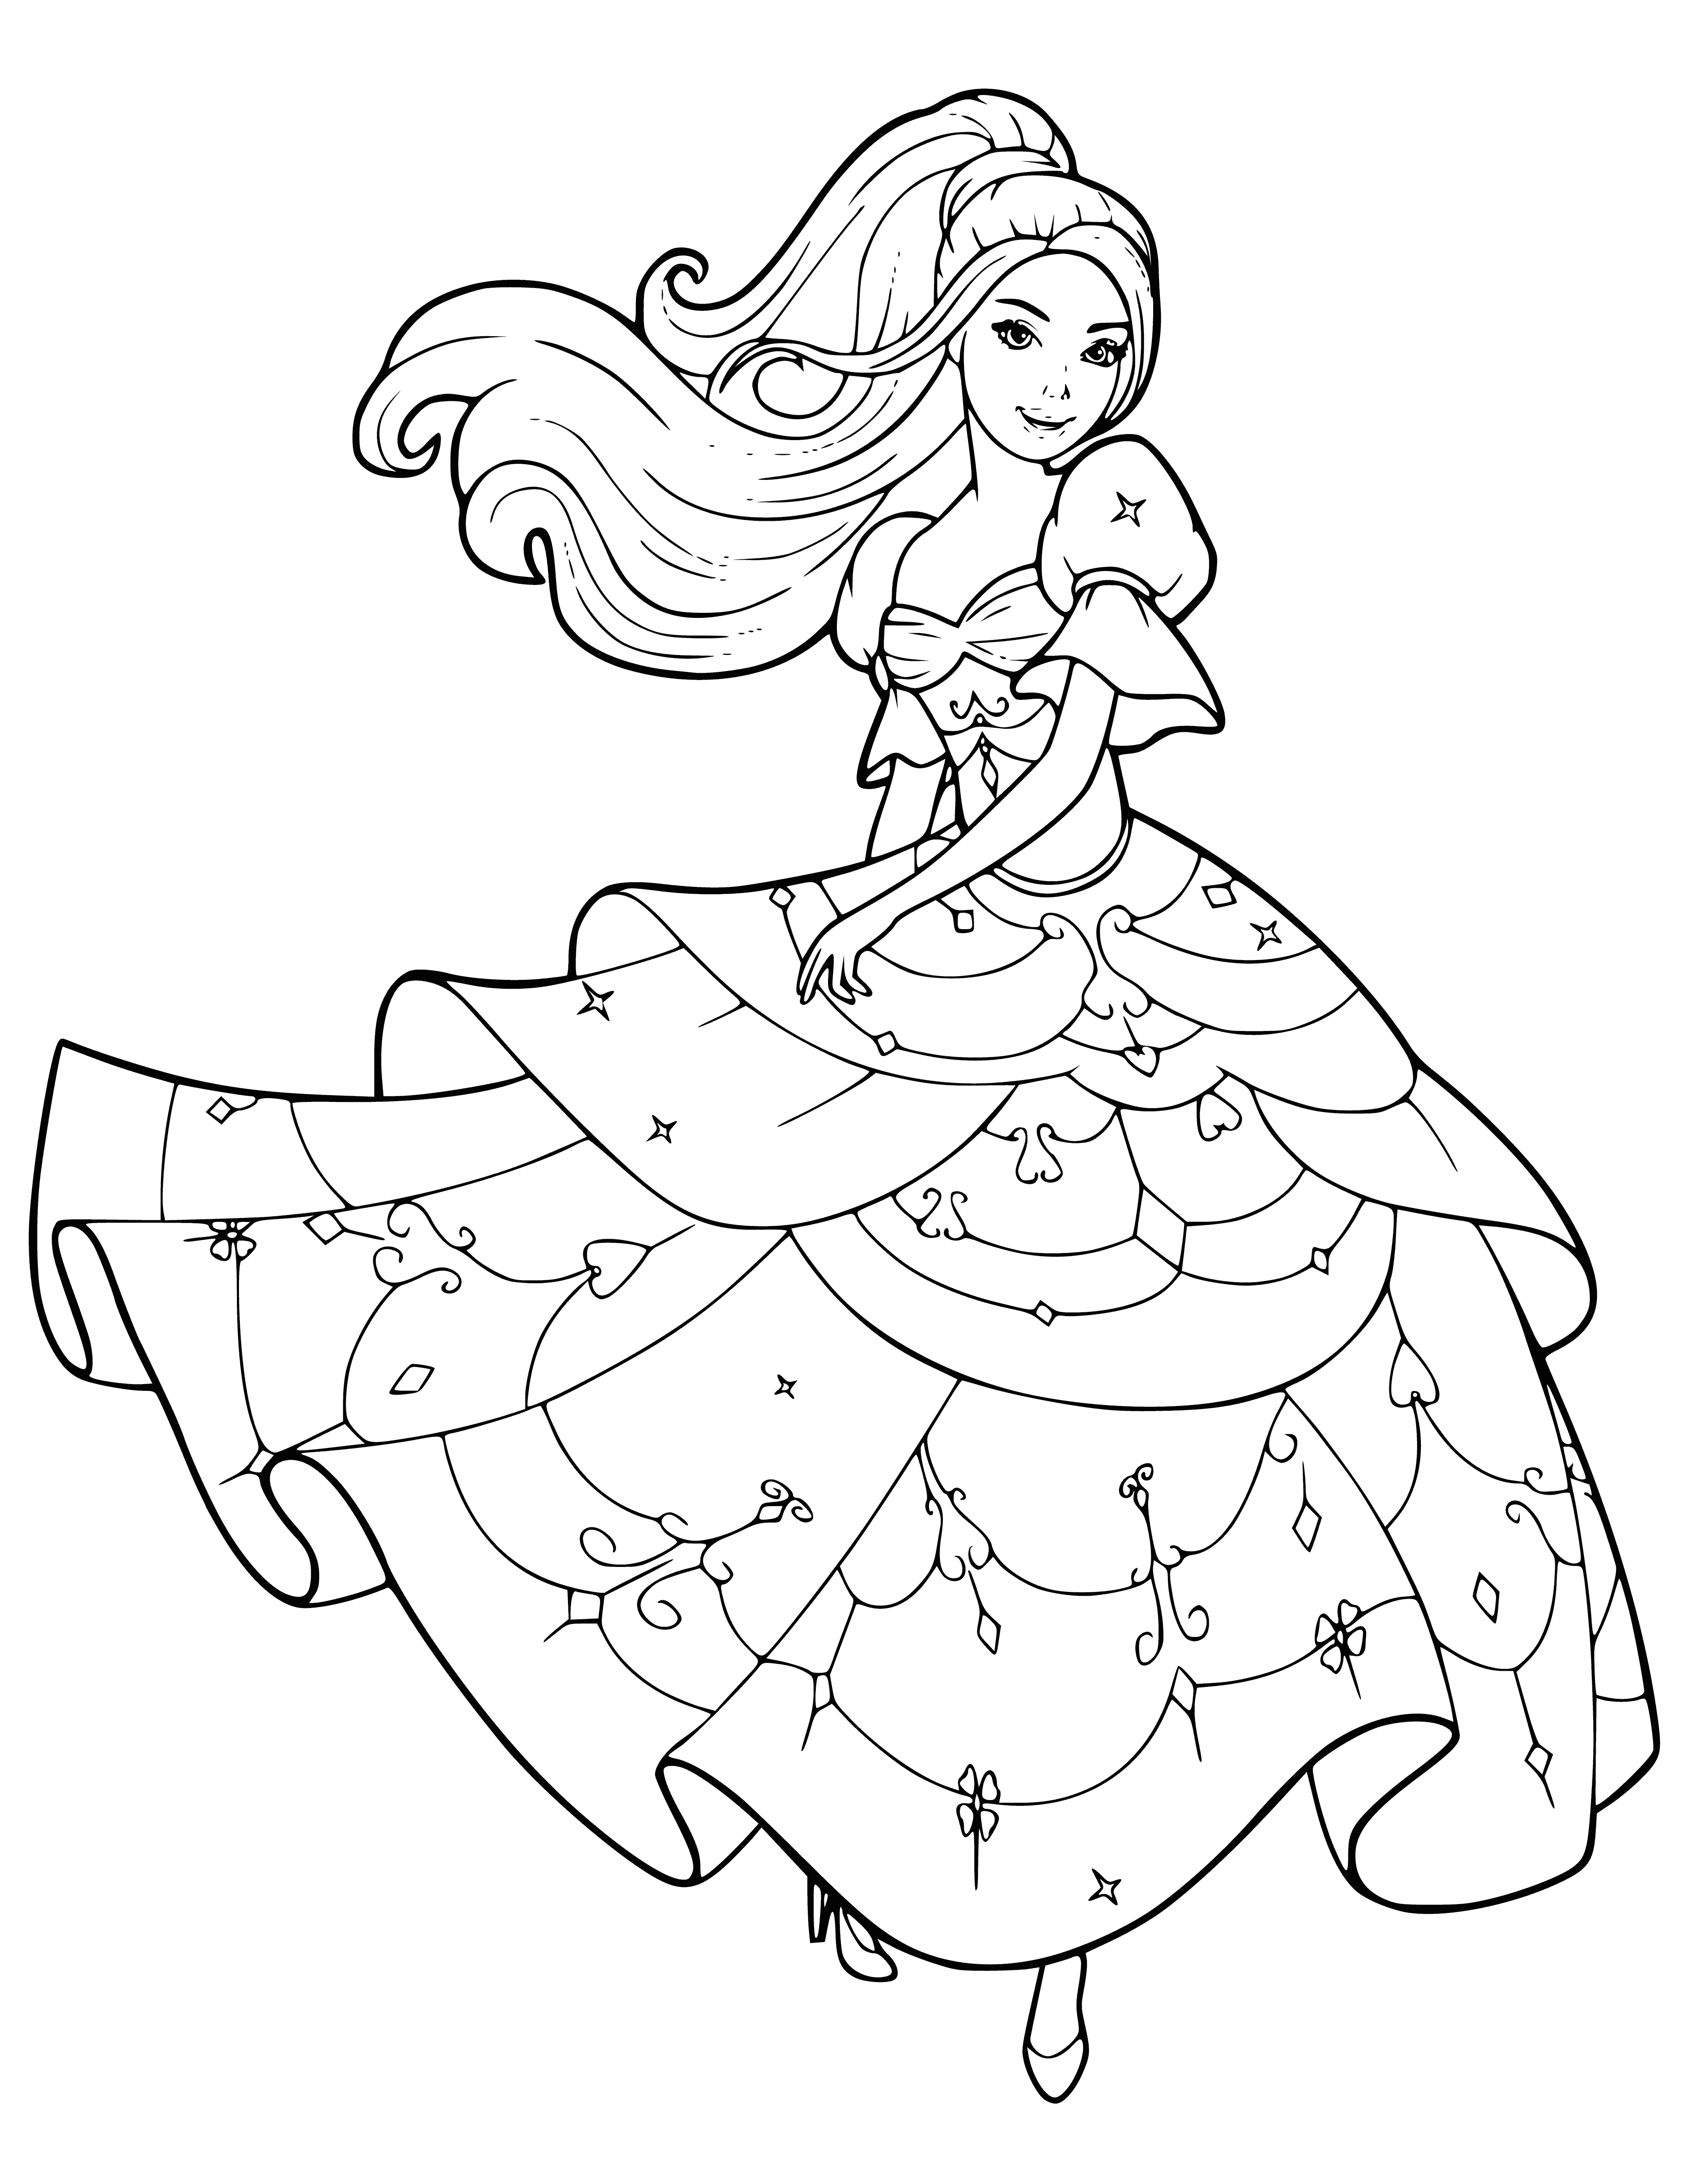 coloring page: Barbie - Dance Barbie: plastic doll with blonde hair, blue eyes, pink leotard, tutu, tights & ballet slippers, plus pink ribbon for hair. #FunForKids